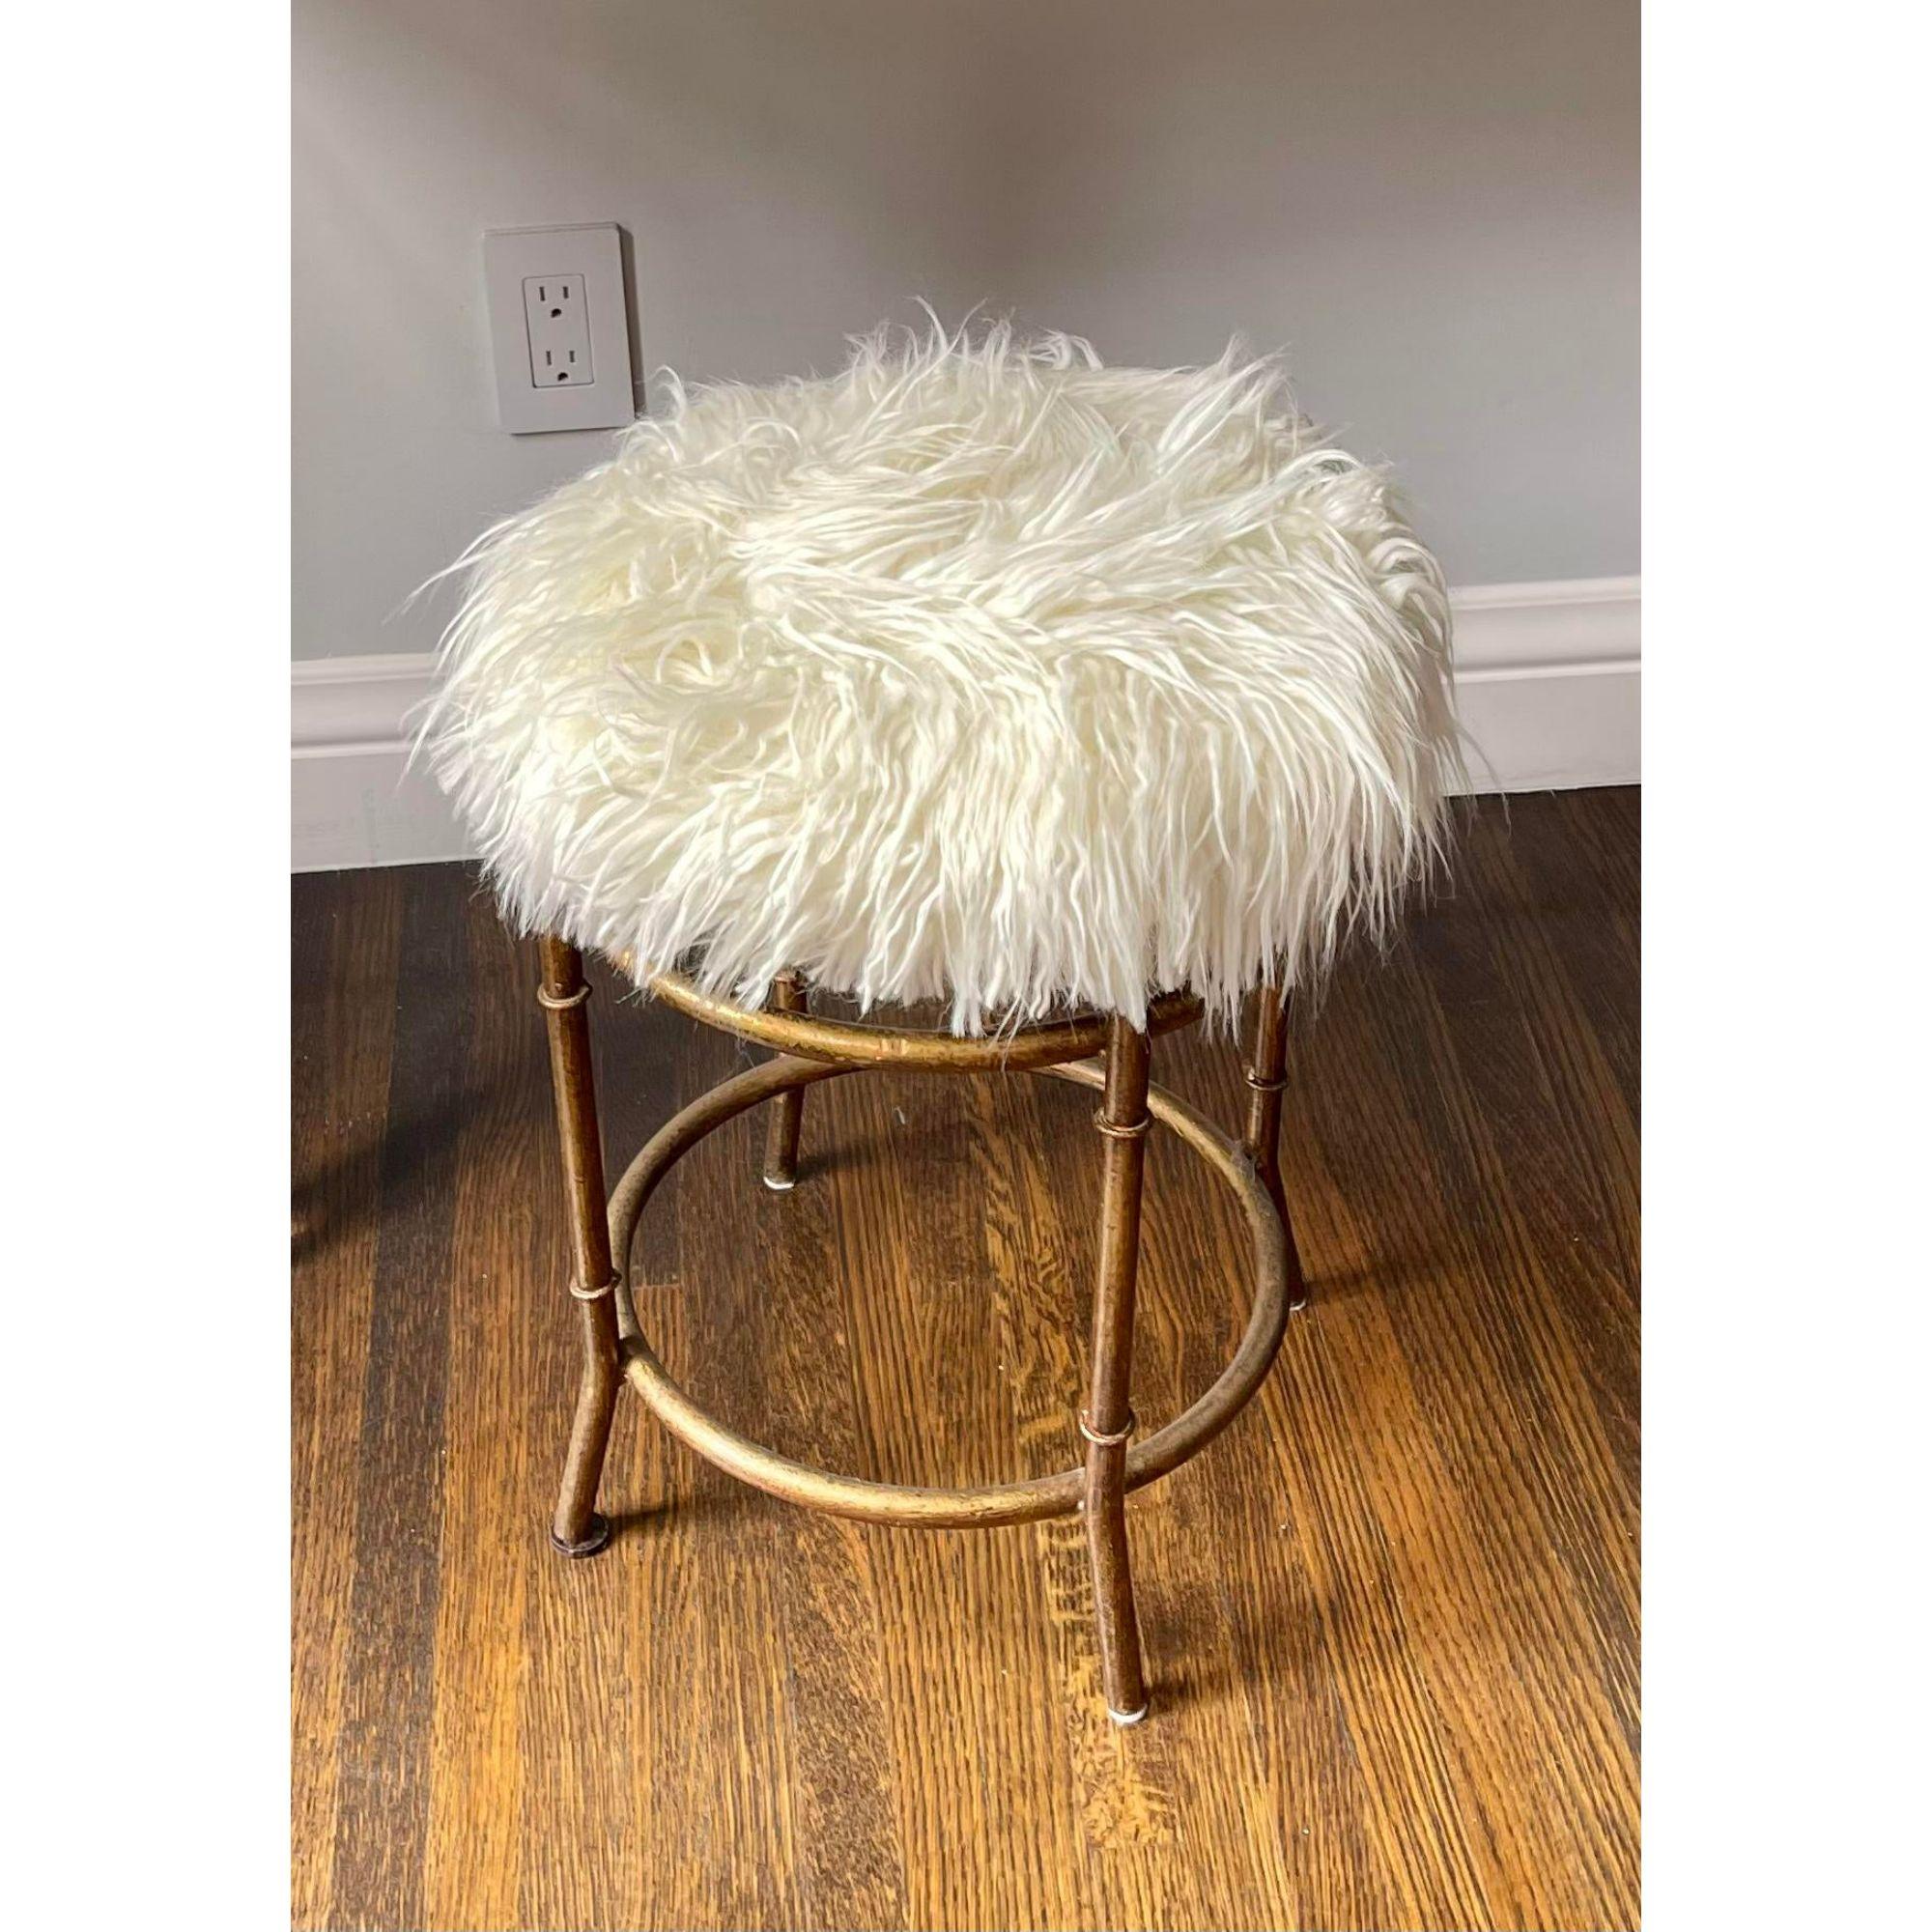 Mid-Century Modern Faux Bamboo Metal Stool W Flokati Seat

Additional information: 
Materials: Faux Bamboo, Metal
Color: Gold
Period: Mid 20th Century
Styles: Mid-Century Modern
Number of Seats: 1
Item Type: Vintage, Antique or